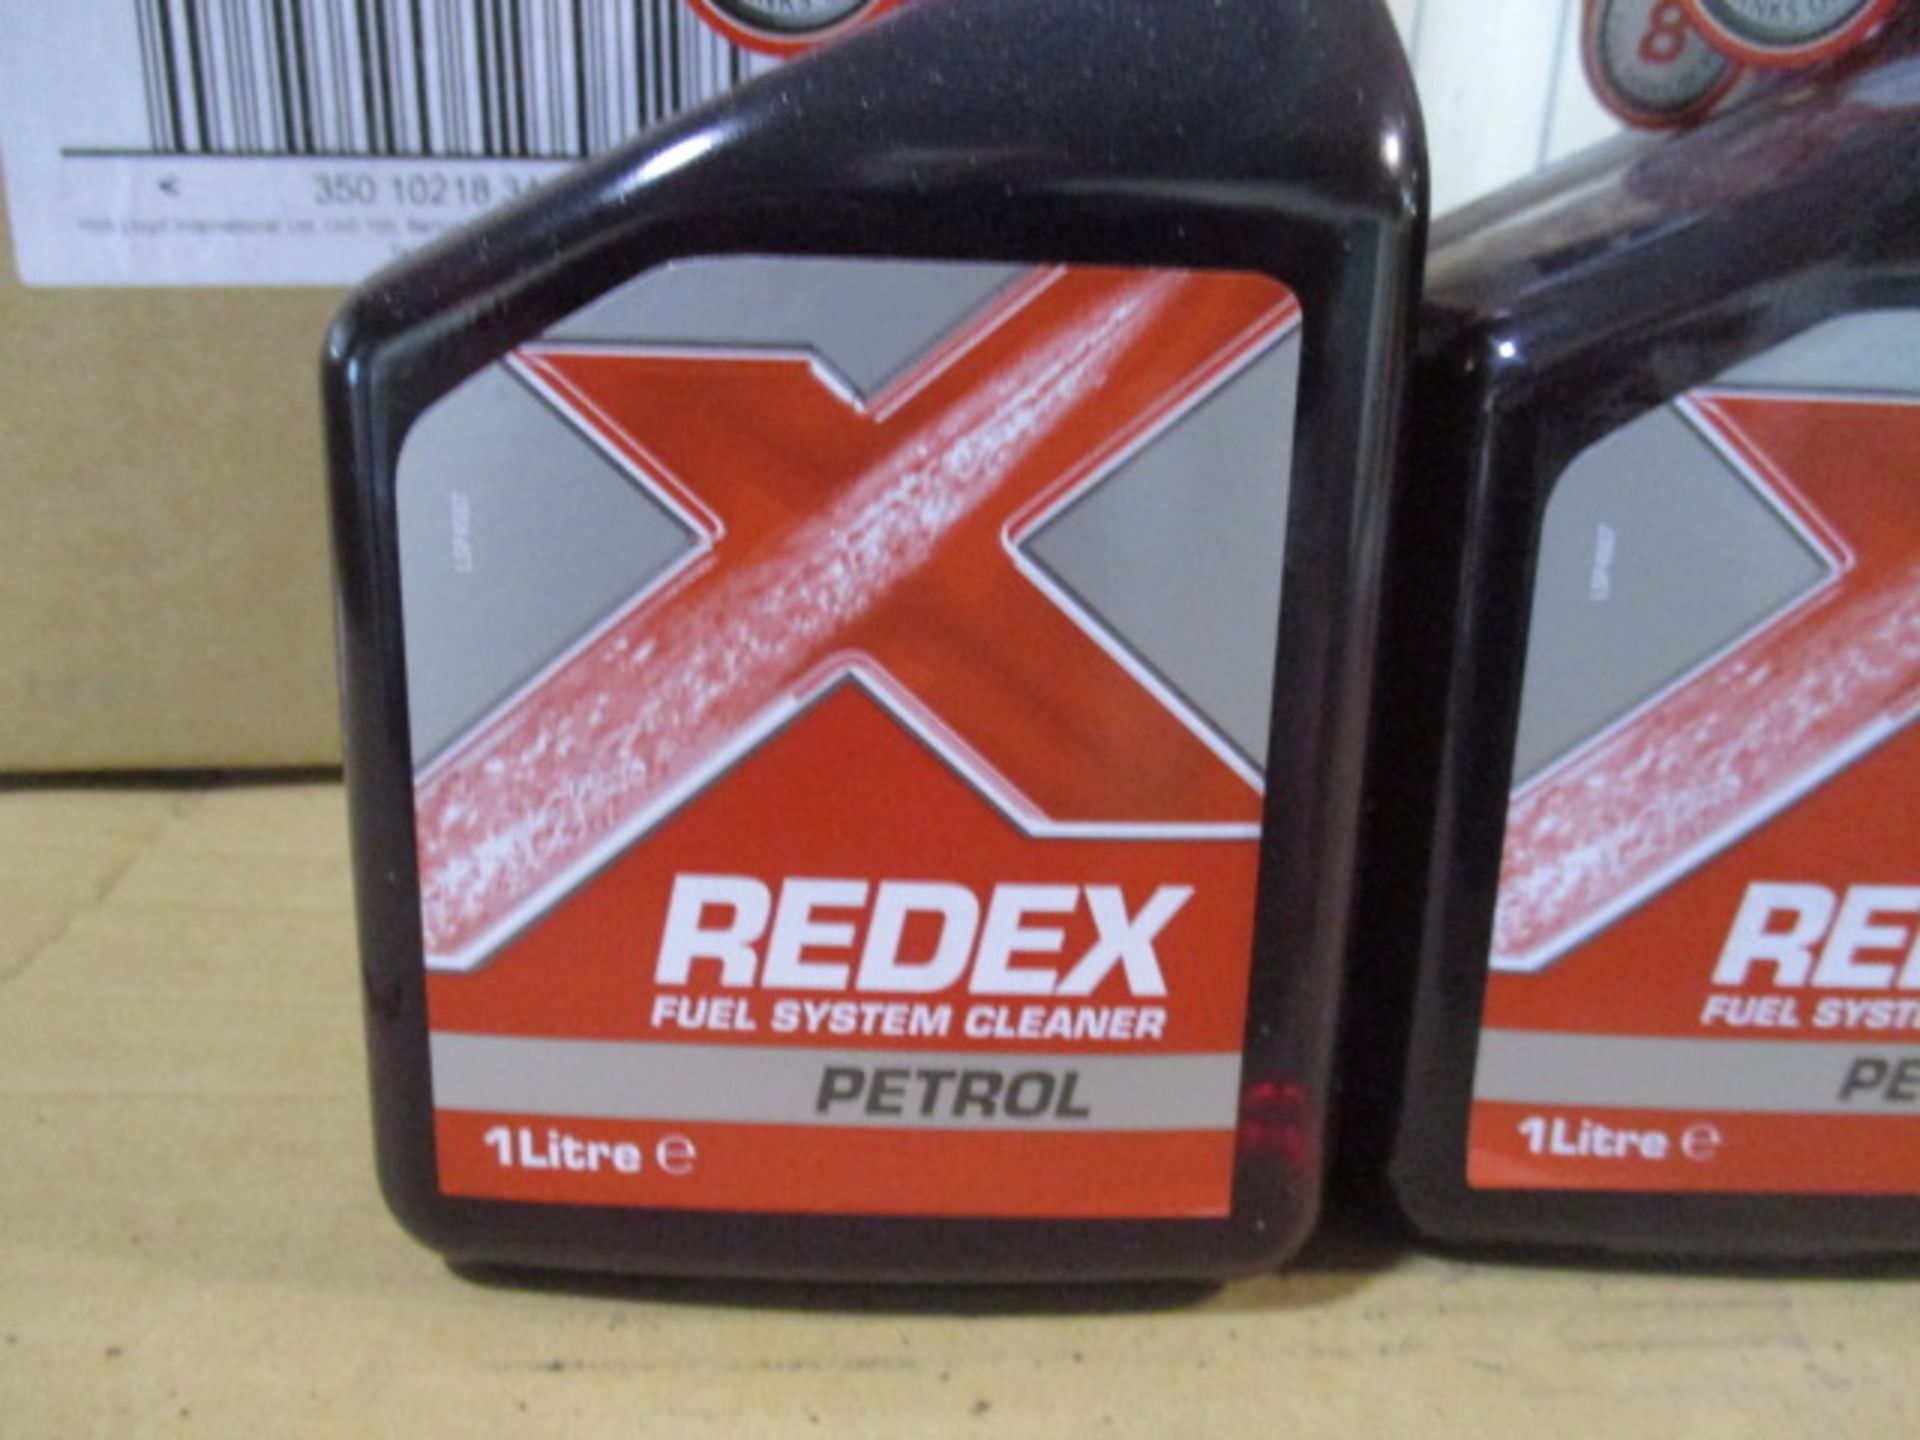 10x cartons new and sealed Redex 1 litre fuel system cleaner rrp £ 11.99. per botte - 6pcs